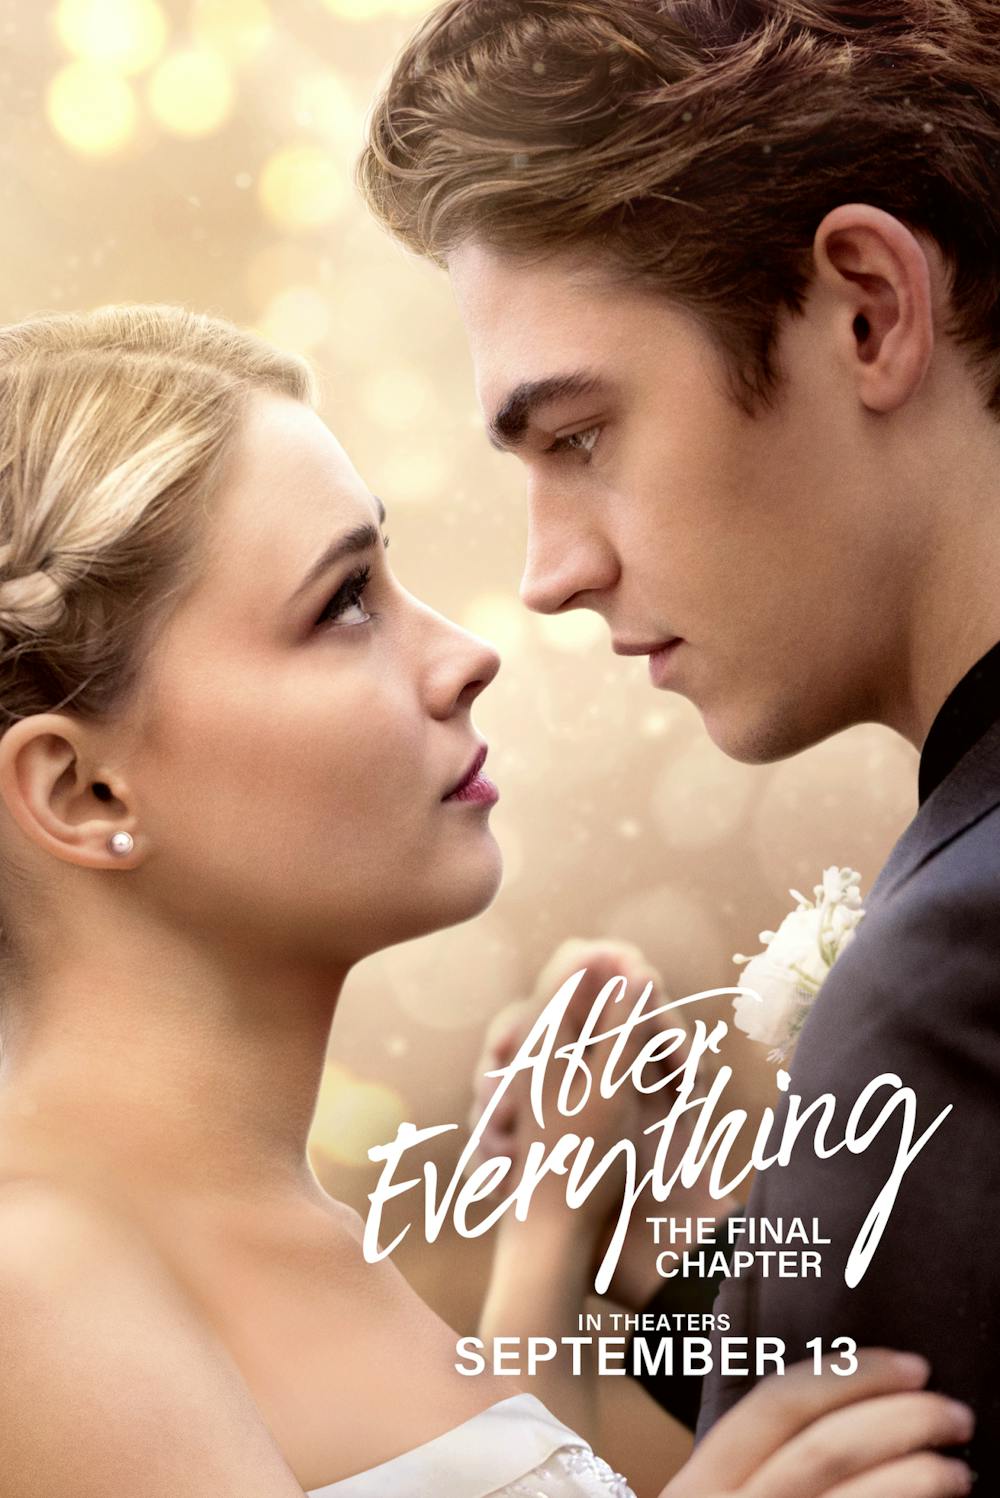 Review: 'After Everything,' the final movie leaves viewers wanting more